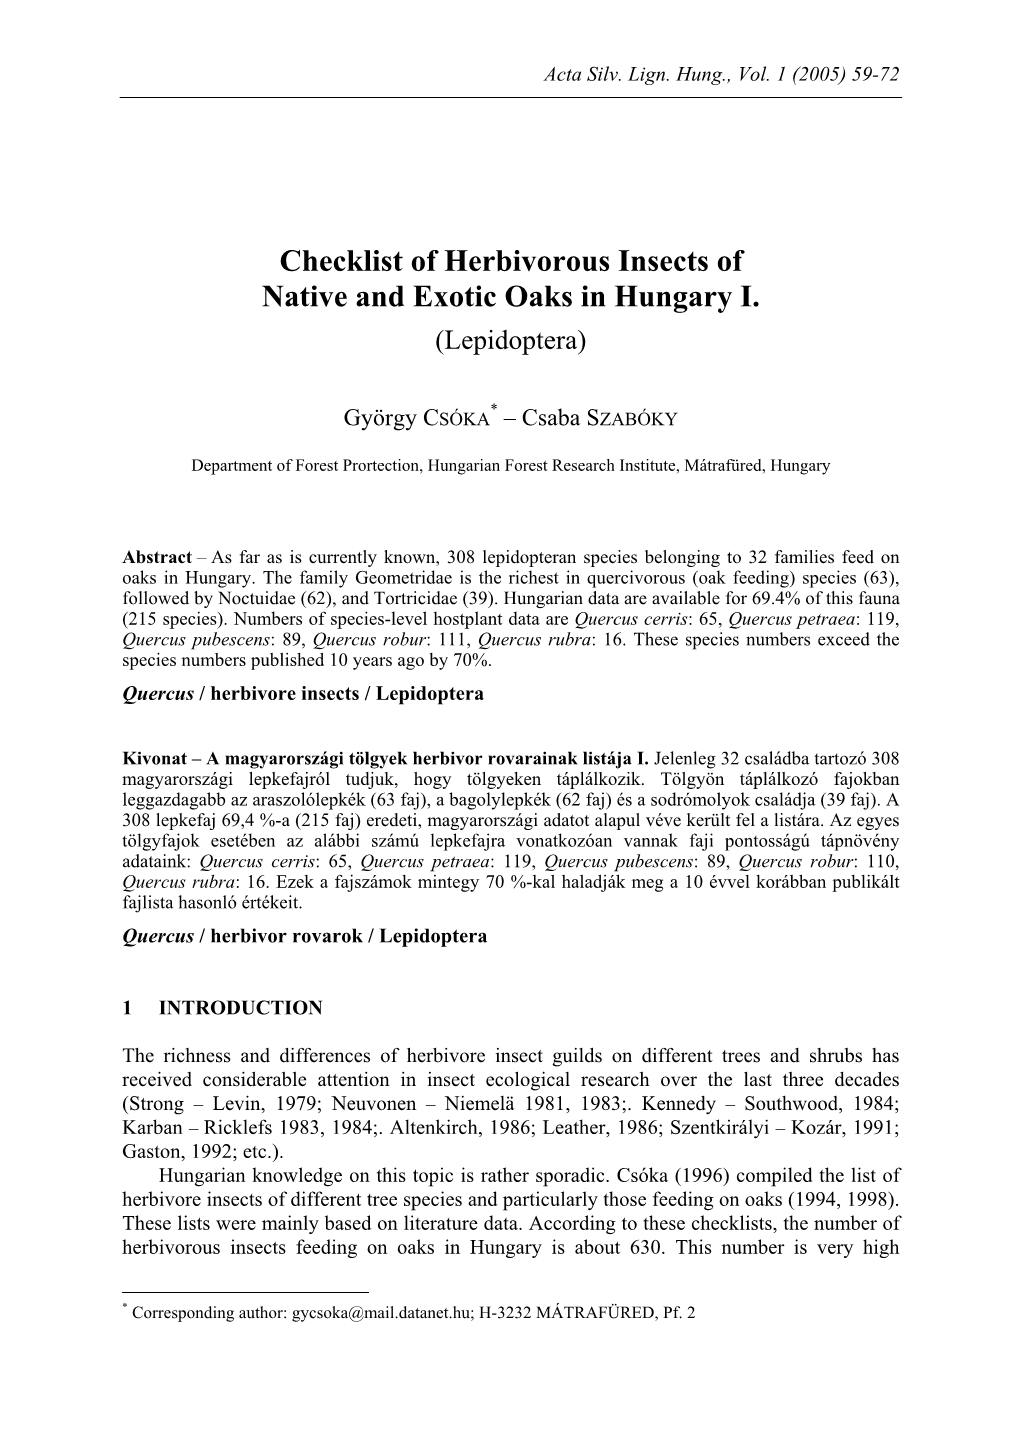 Checklist of Herbivorous Insects of Native and Exotic Oaks in Hungary I. (Lepidoptera)